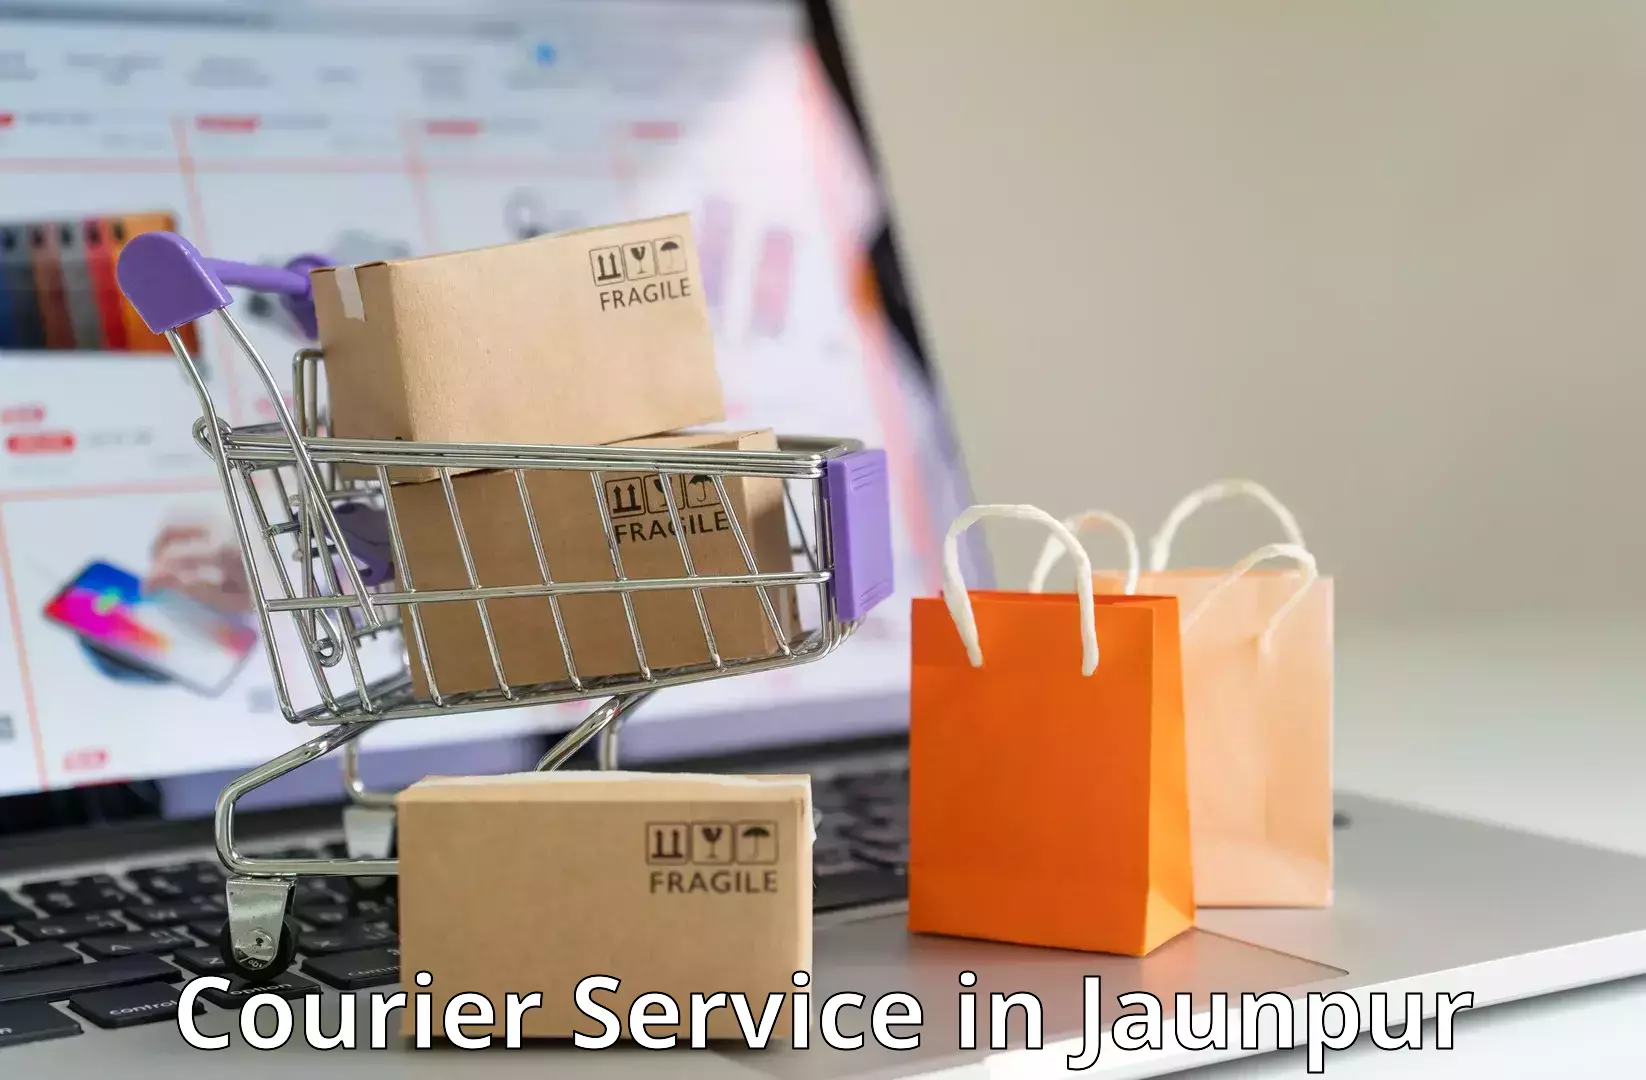 Short distance delivery in Jaunpur